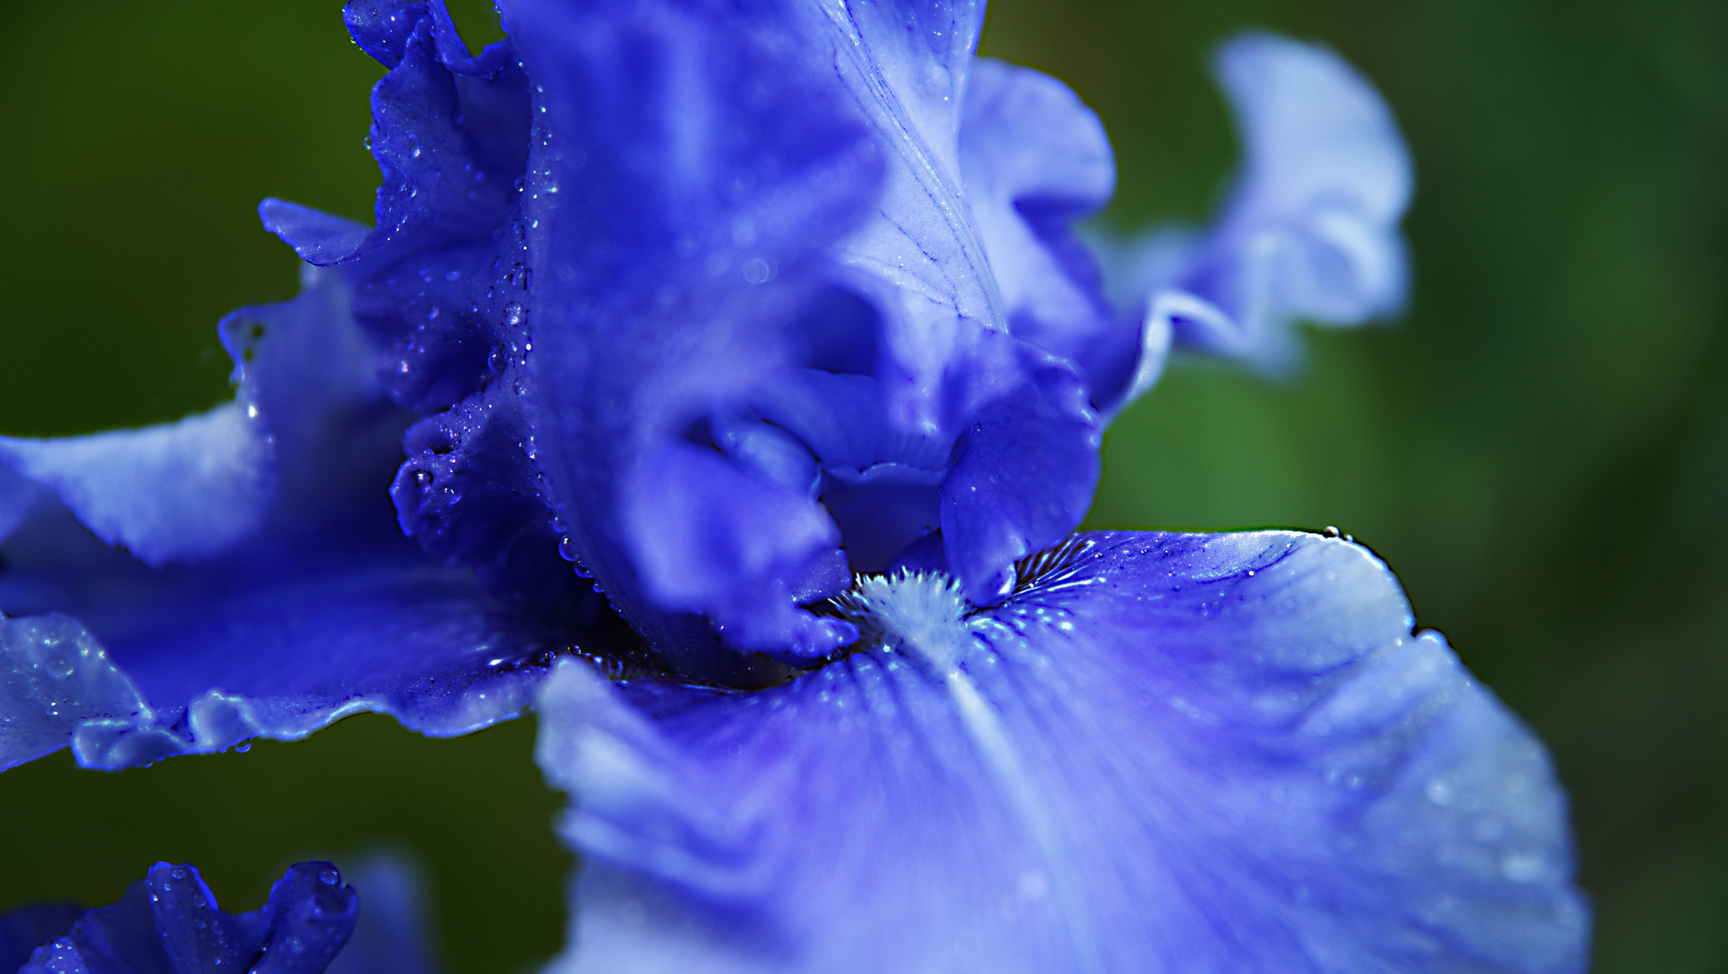 Wonderful shades of blue in this iris.